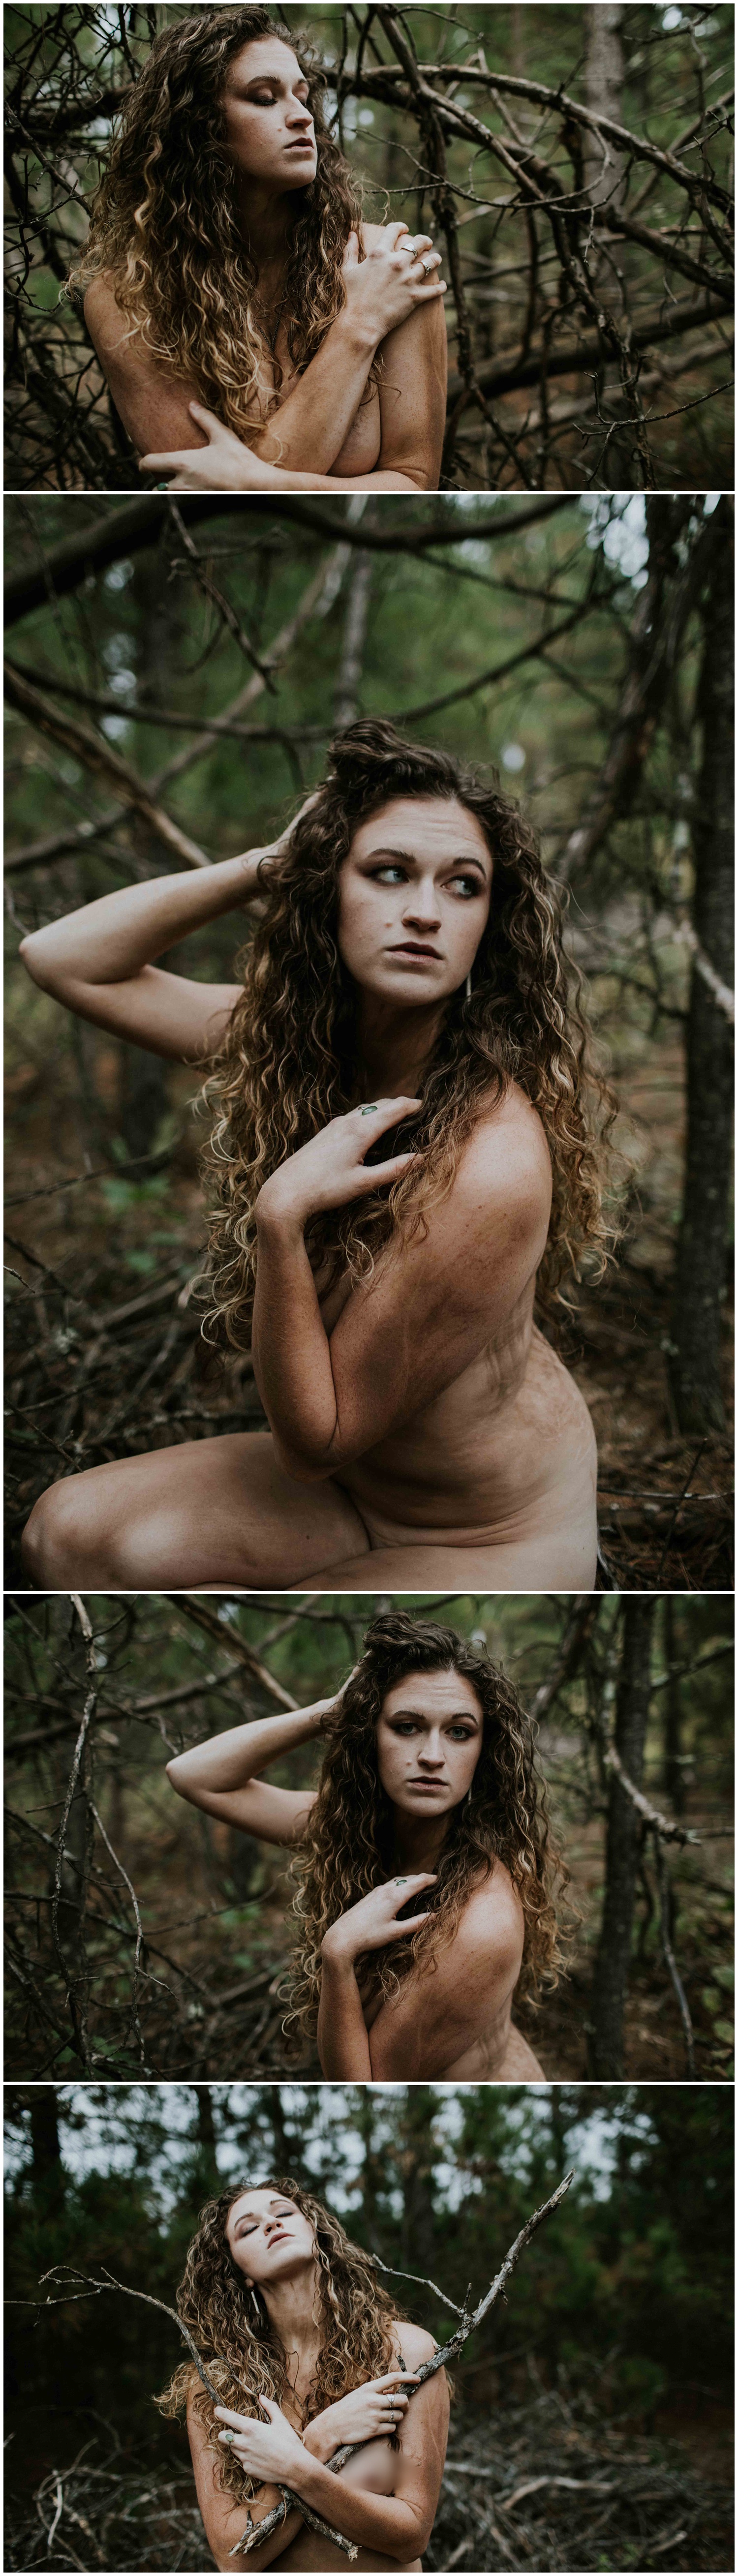 Nude Photography Workshop Wisconsin